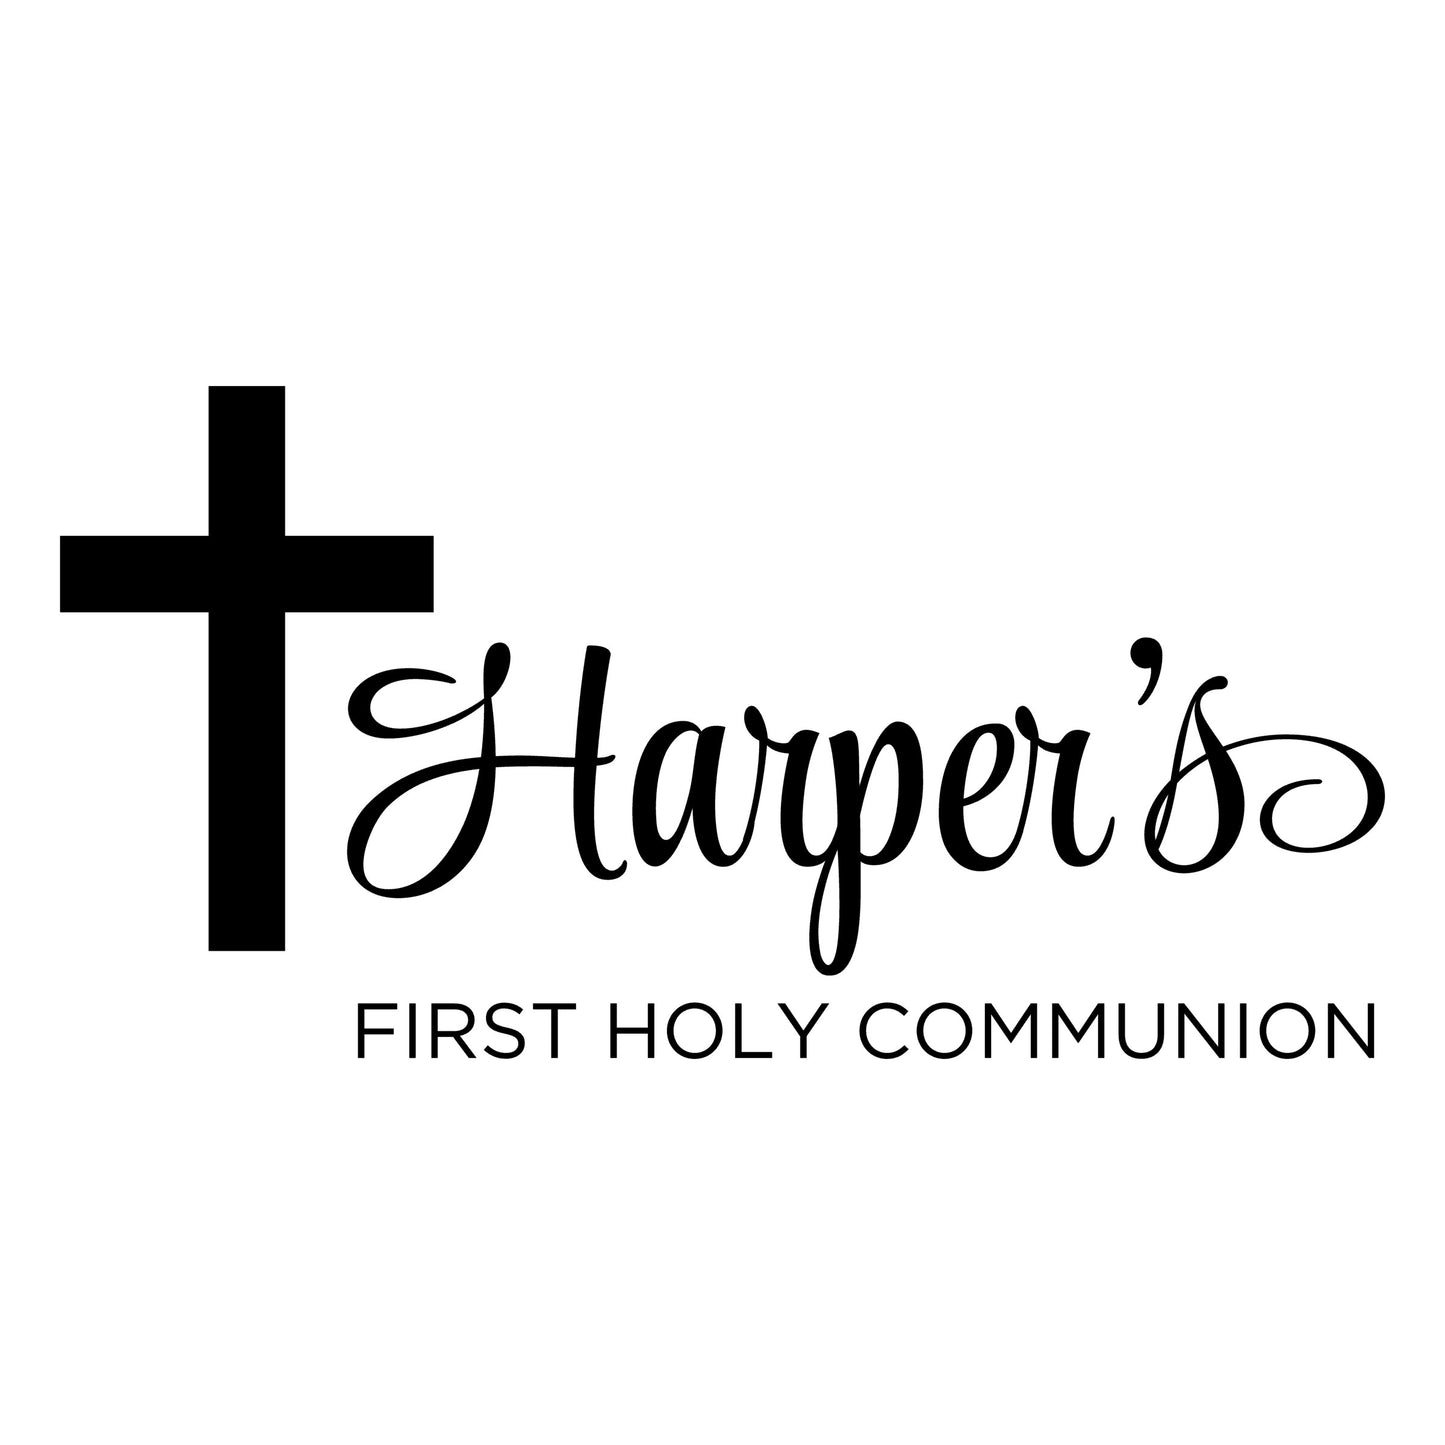 Custom Vinyl Decal for First Holy Communion - Personalized Church Decor